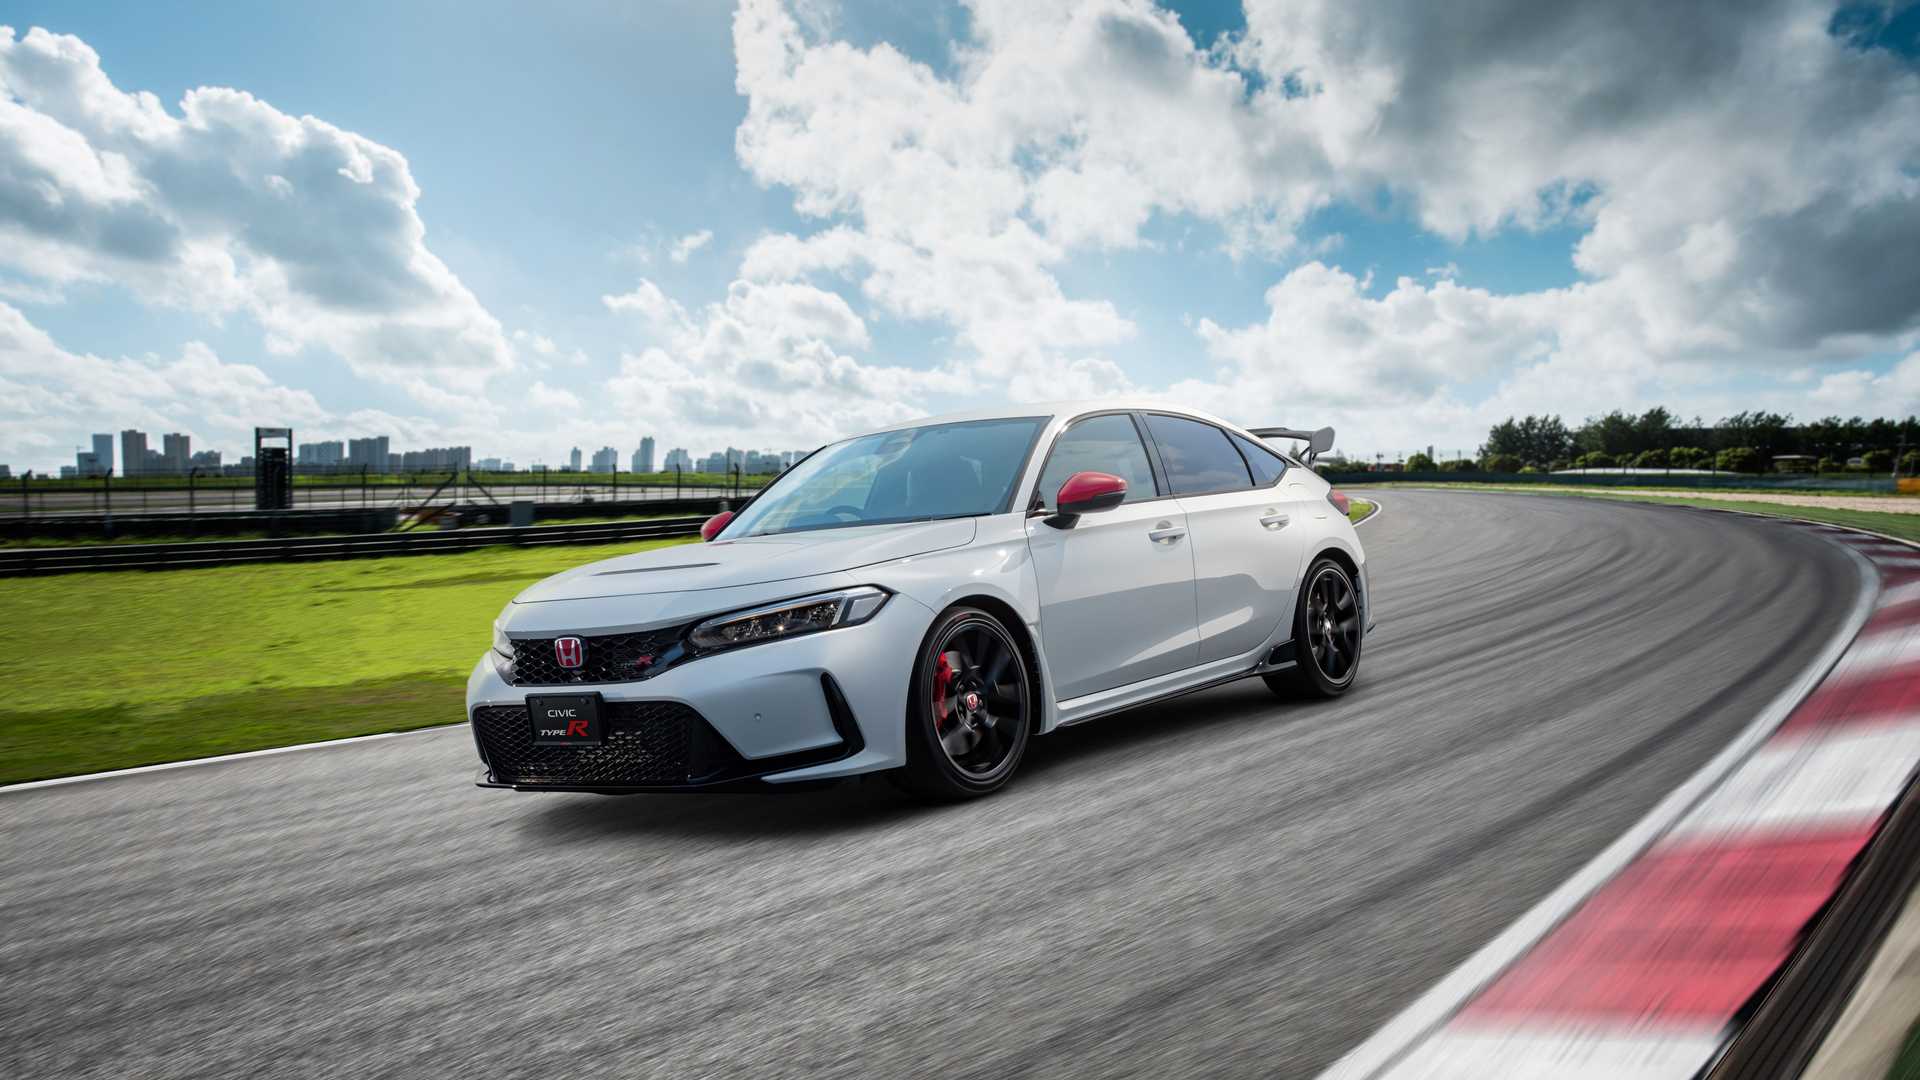 2023 Honda Civic Type R With OEM Accessories Gets Walkaround Treatment